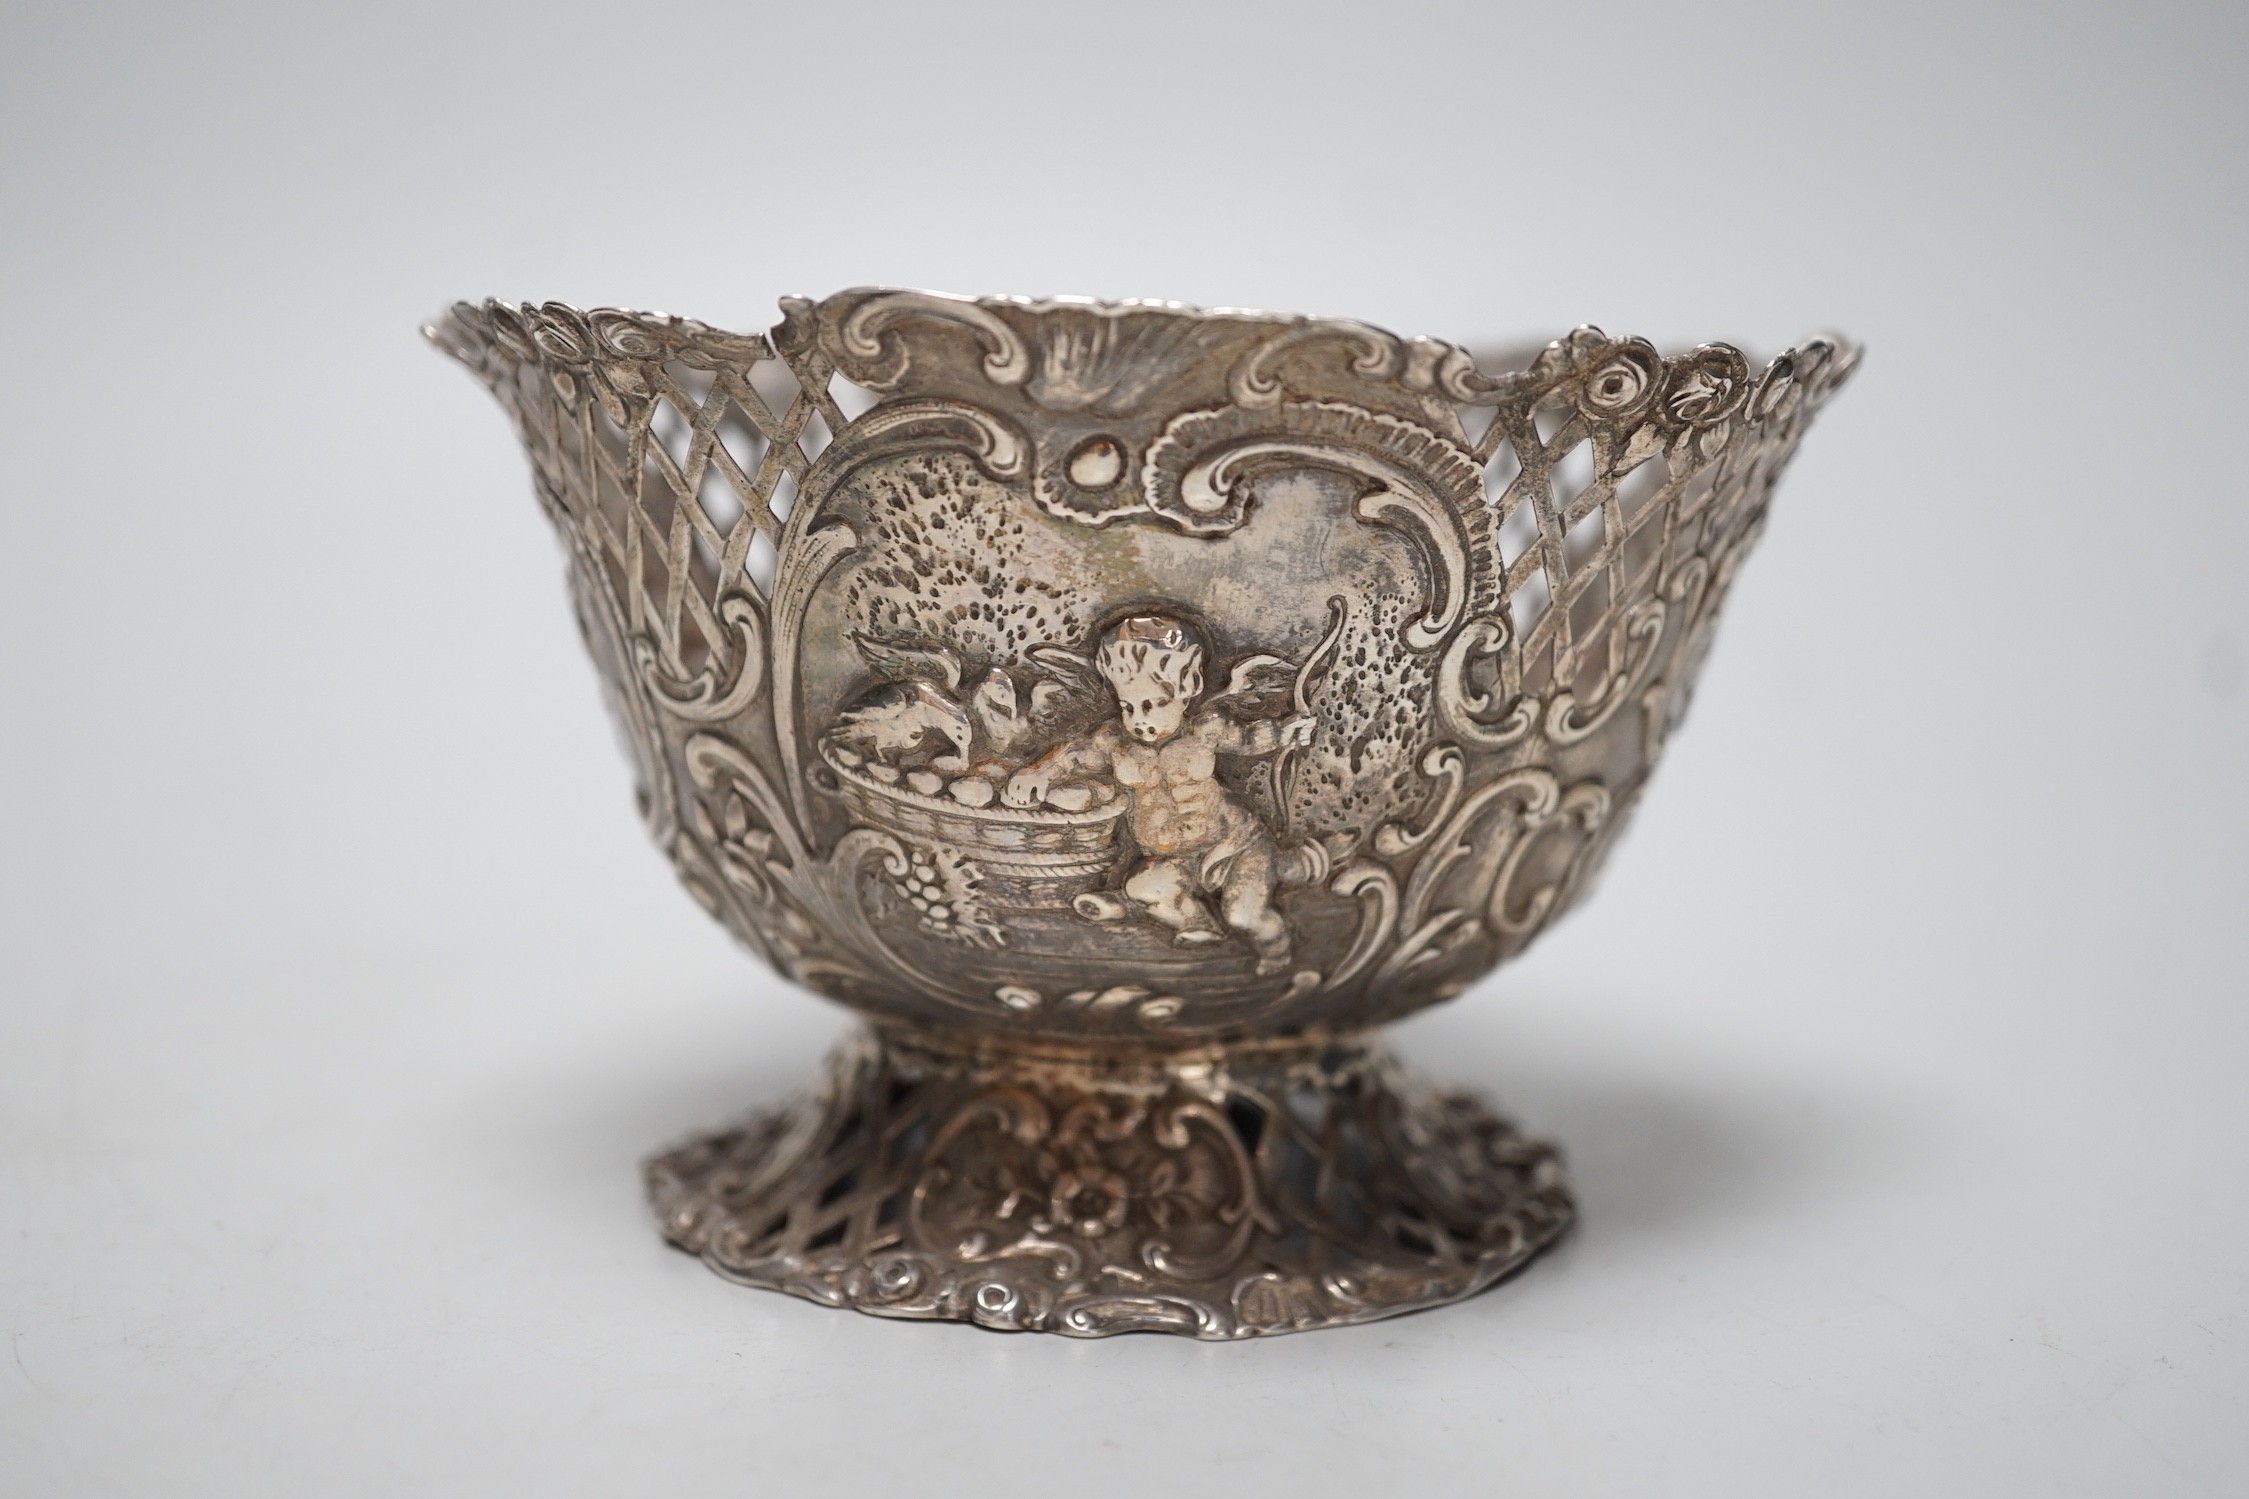 A late 19th century French pierced embossed silver bowl, on circular foot, import marks for William Moreing, London, 1894, diameter 12.2cm, 5.8oz.